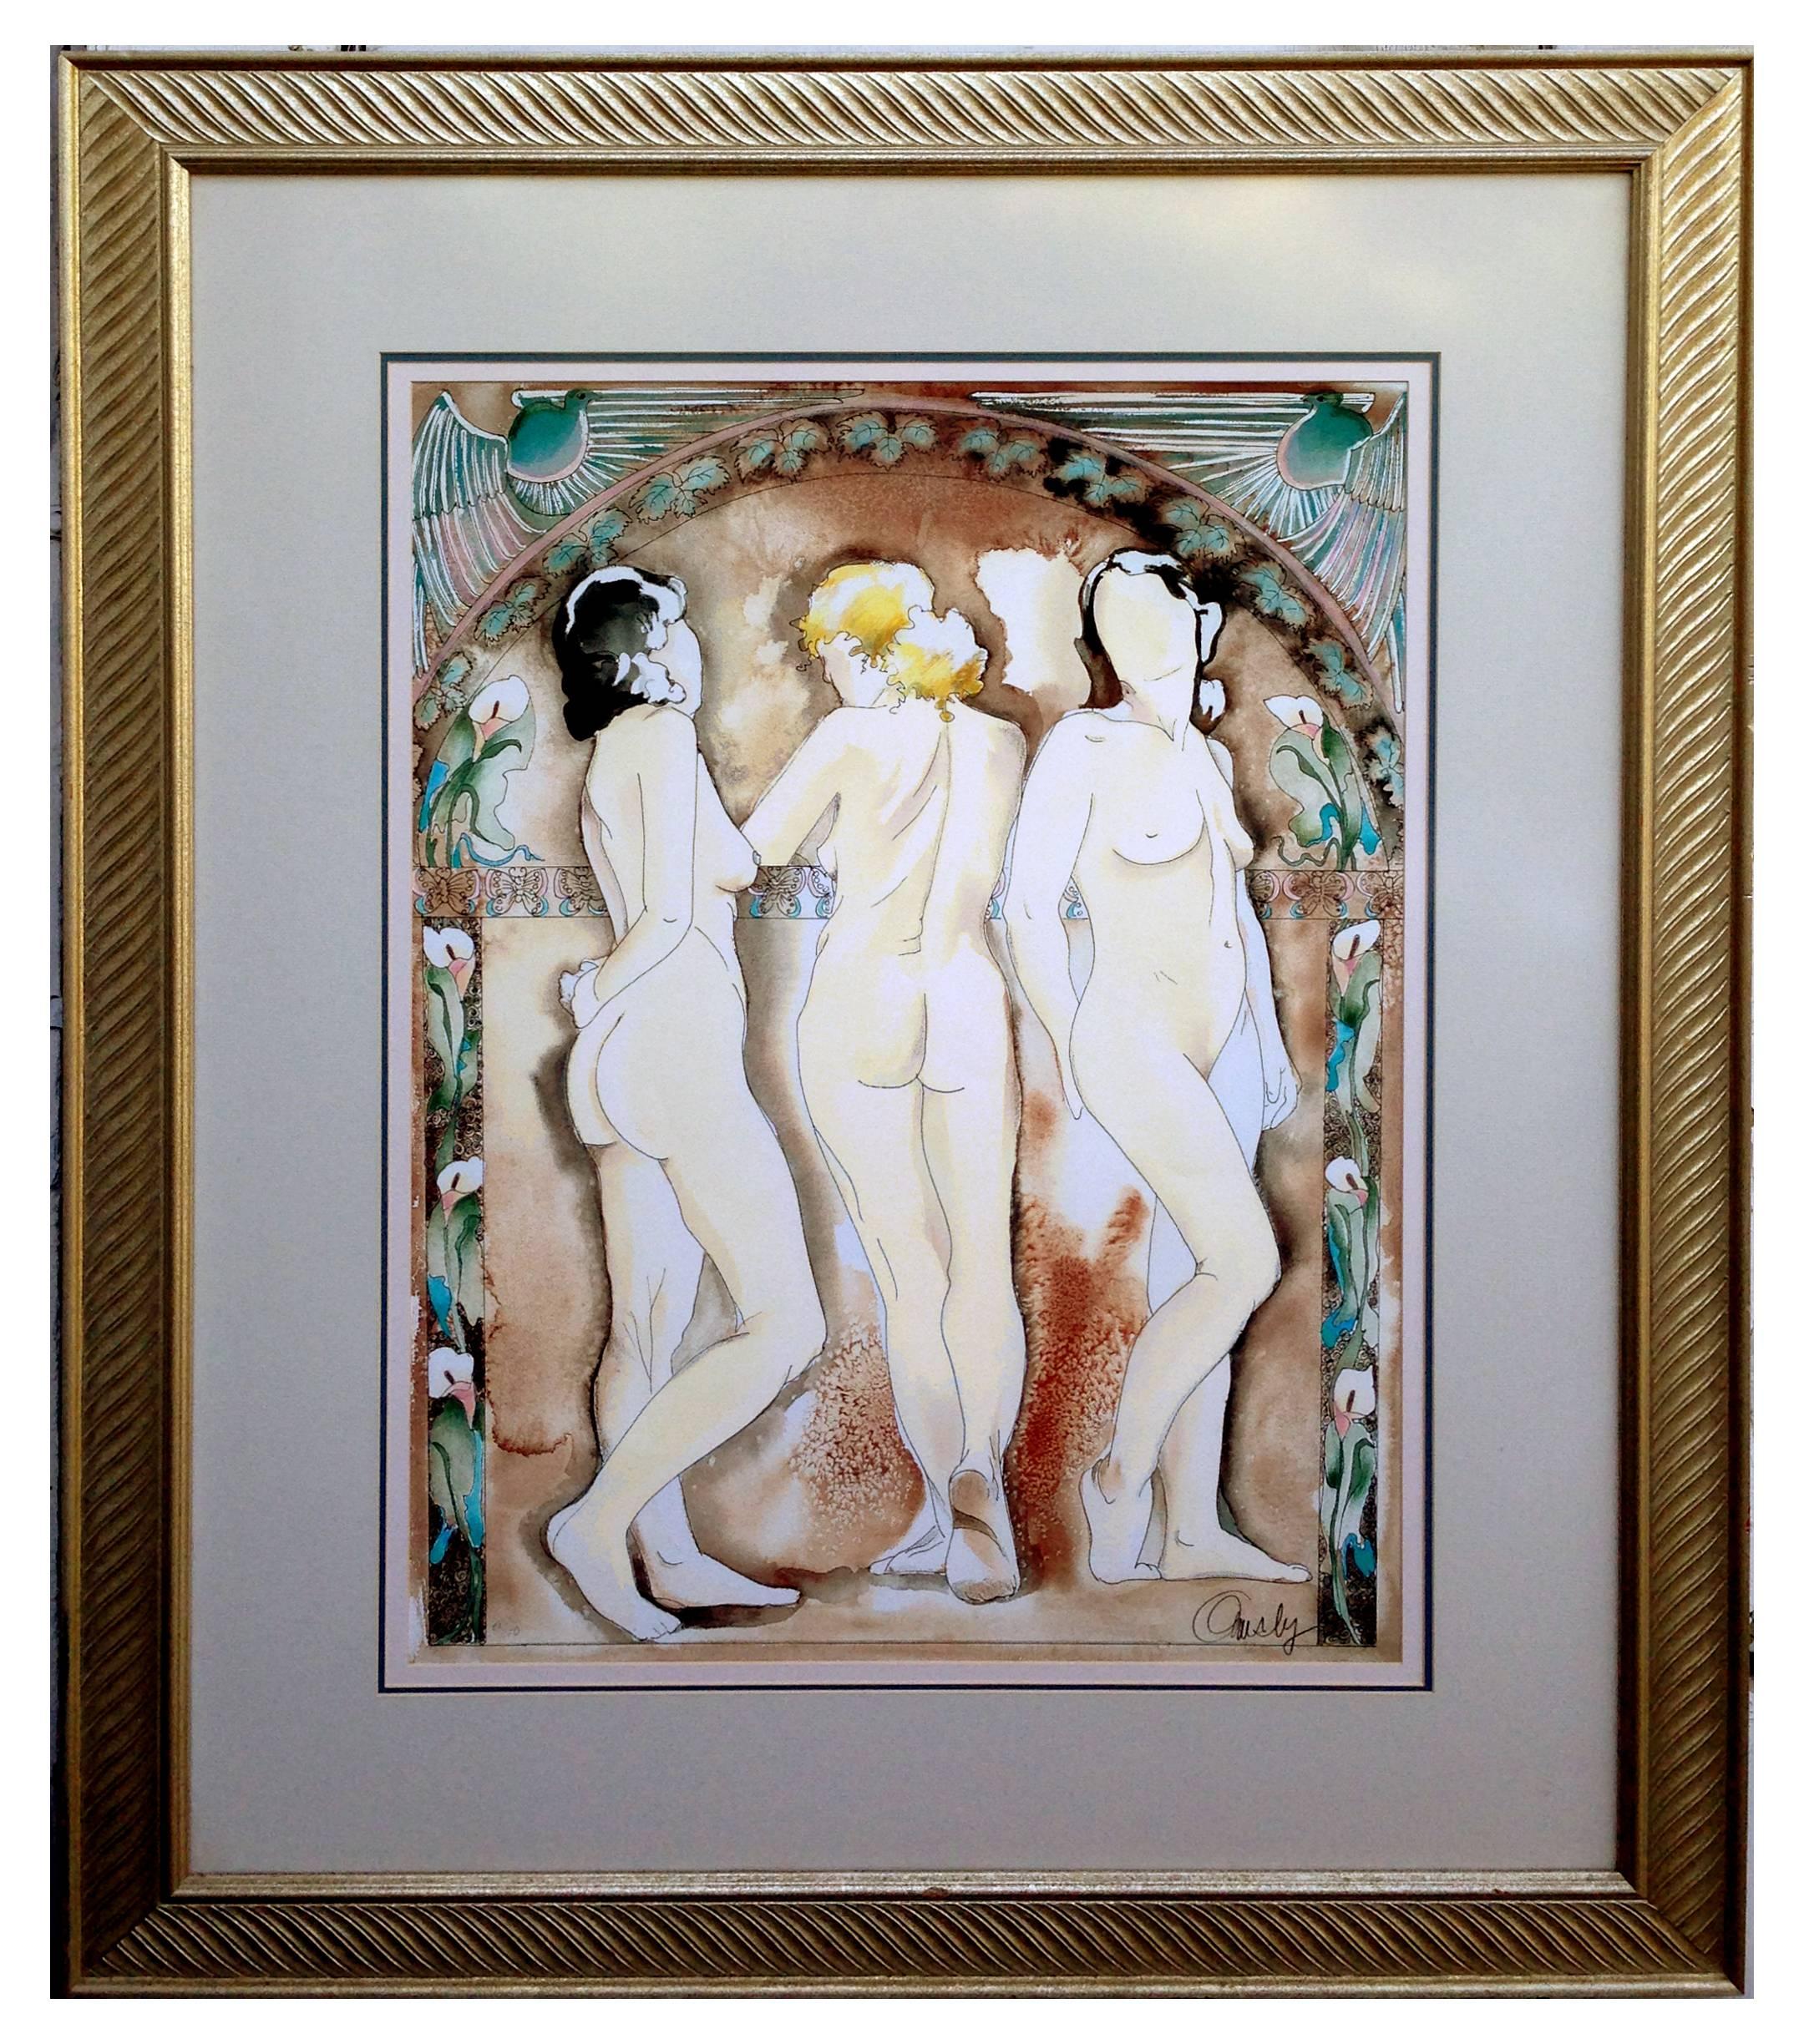 Anne Ormsby Figurative Print - "The Aunties" - Figurative Abstract Limited Edition Print, 20/100